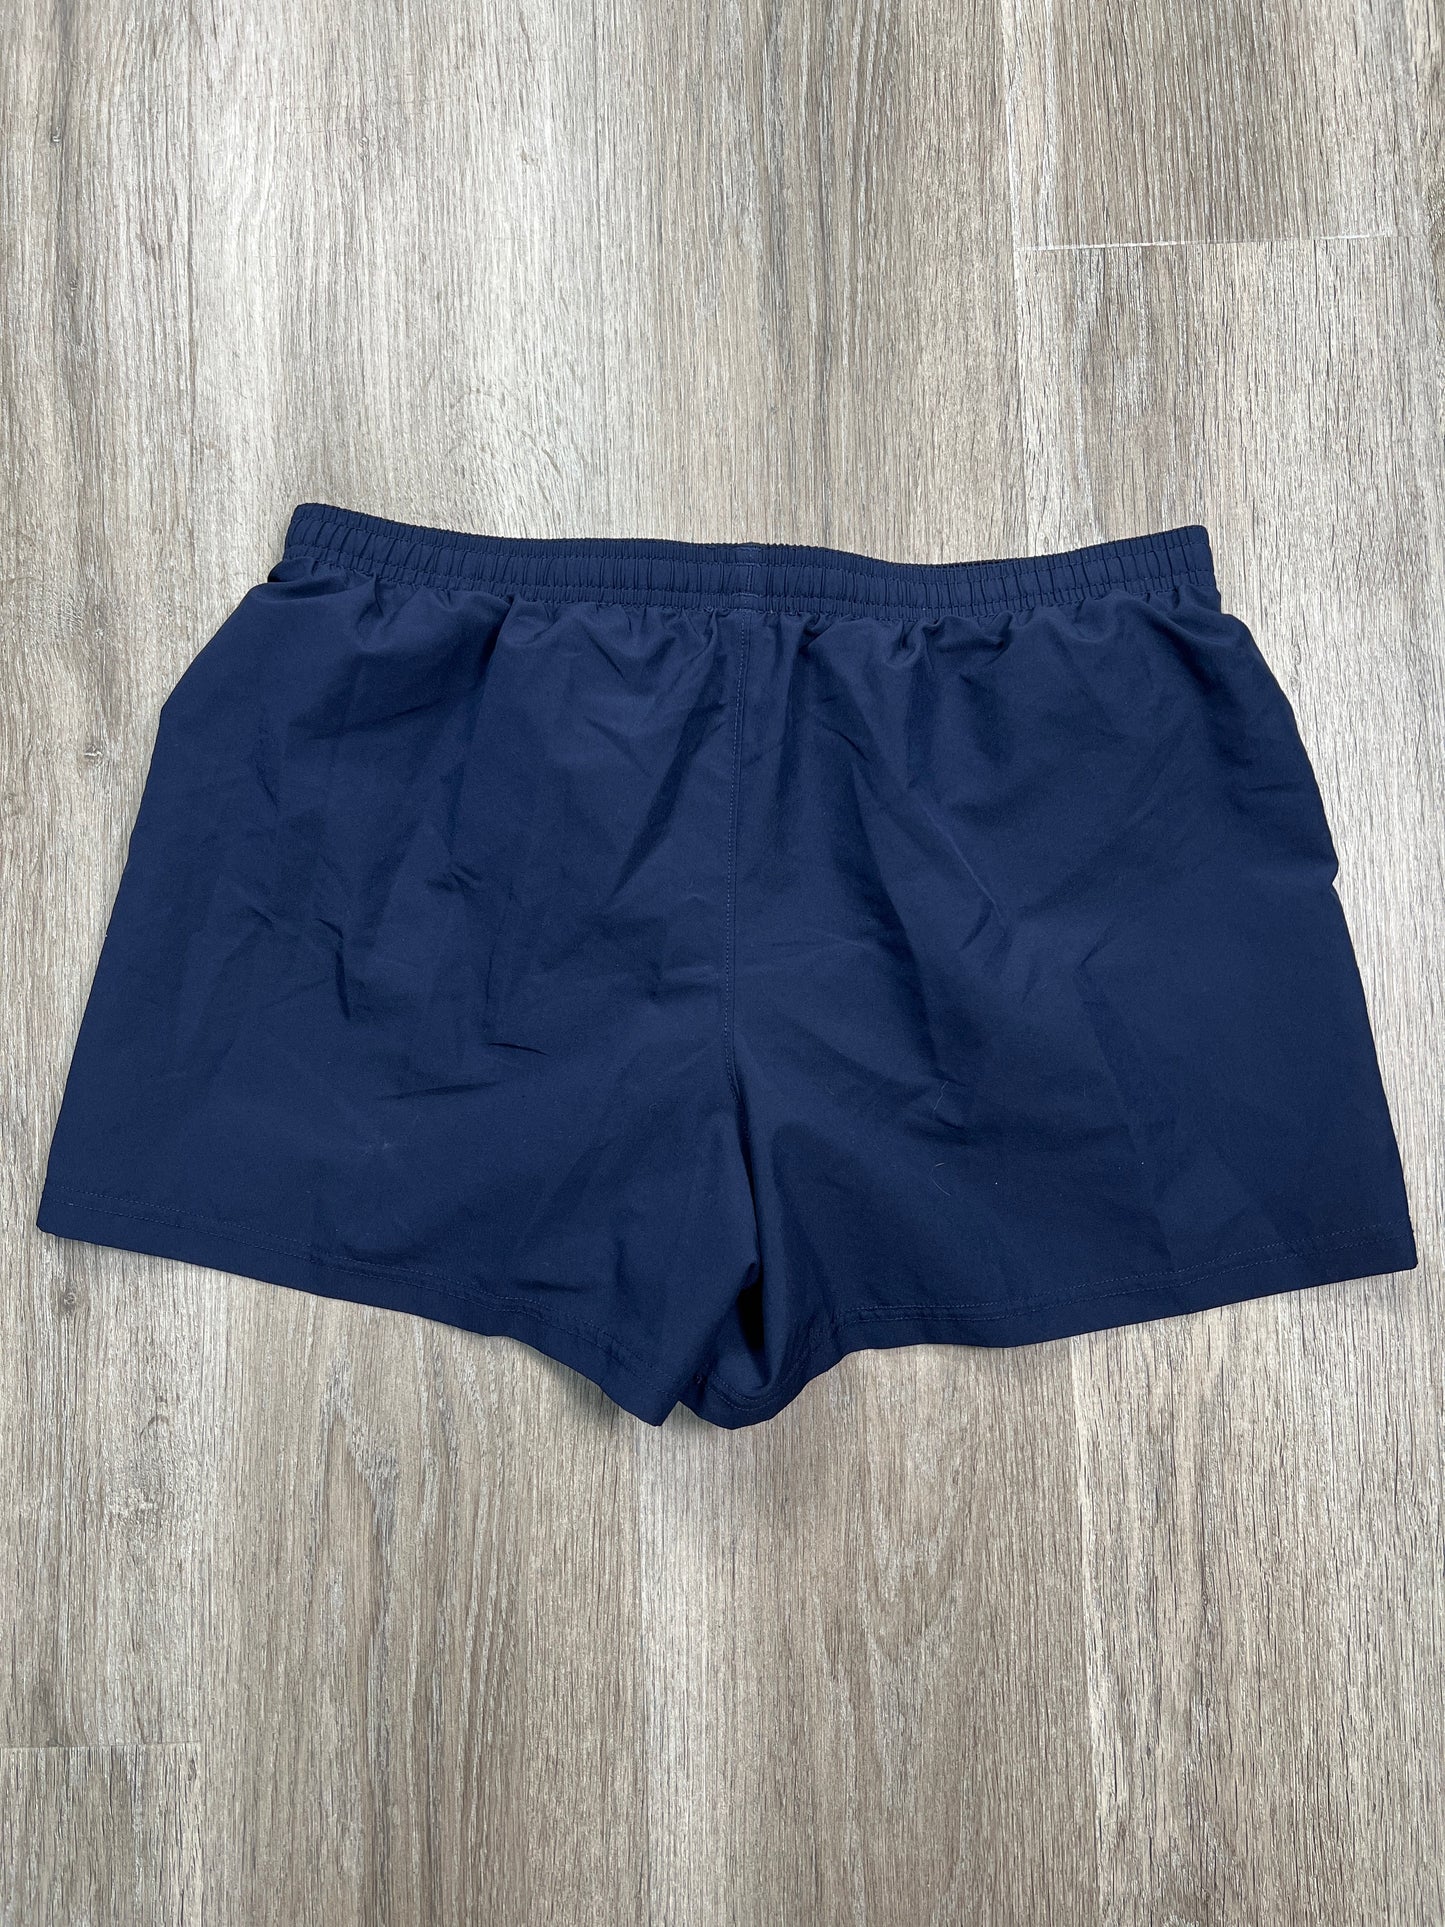 Navy Athletic Shorts Under Armour, Size M